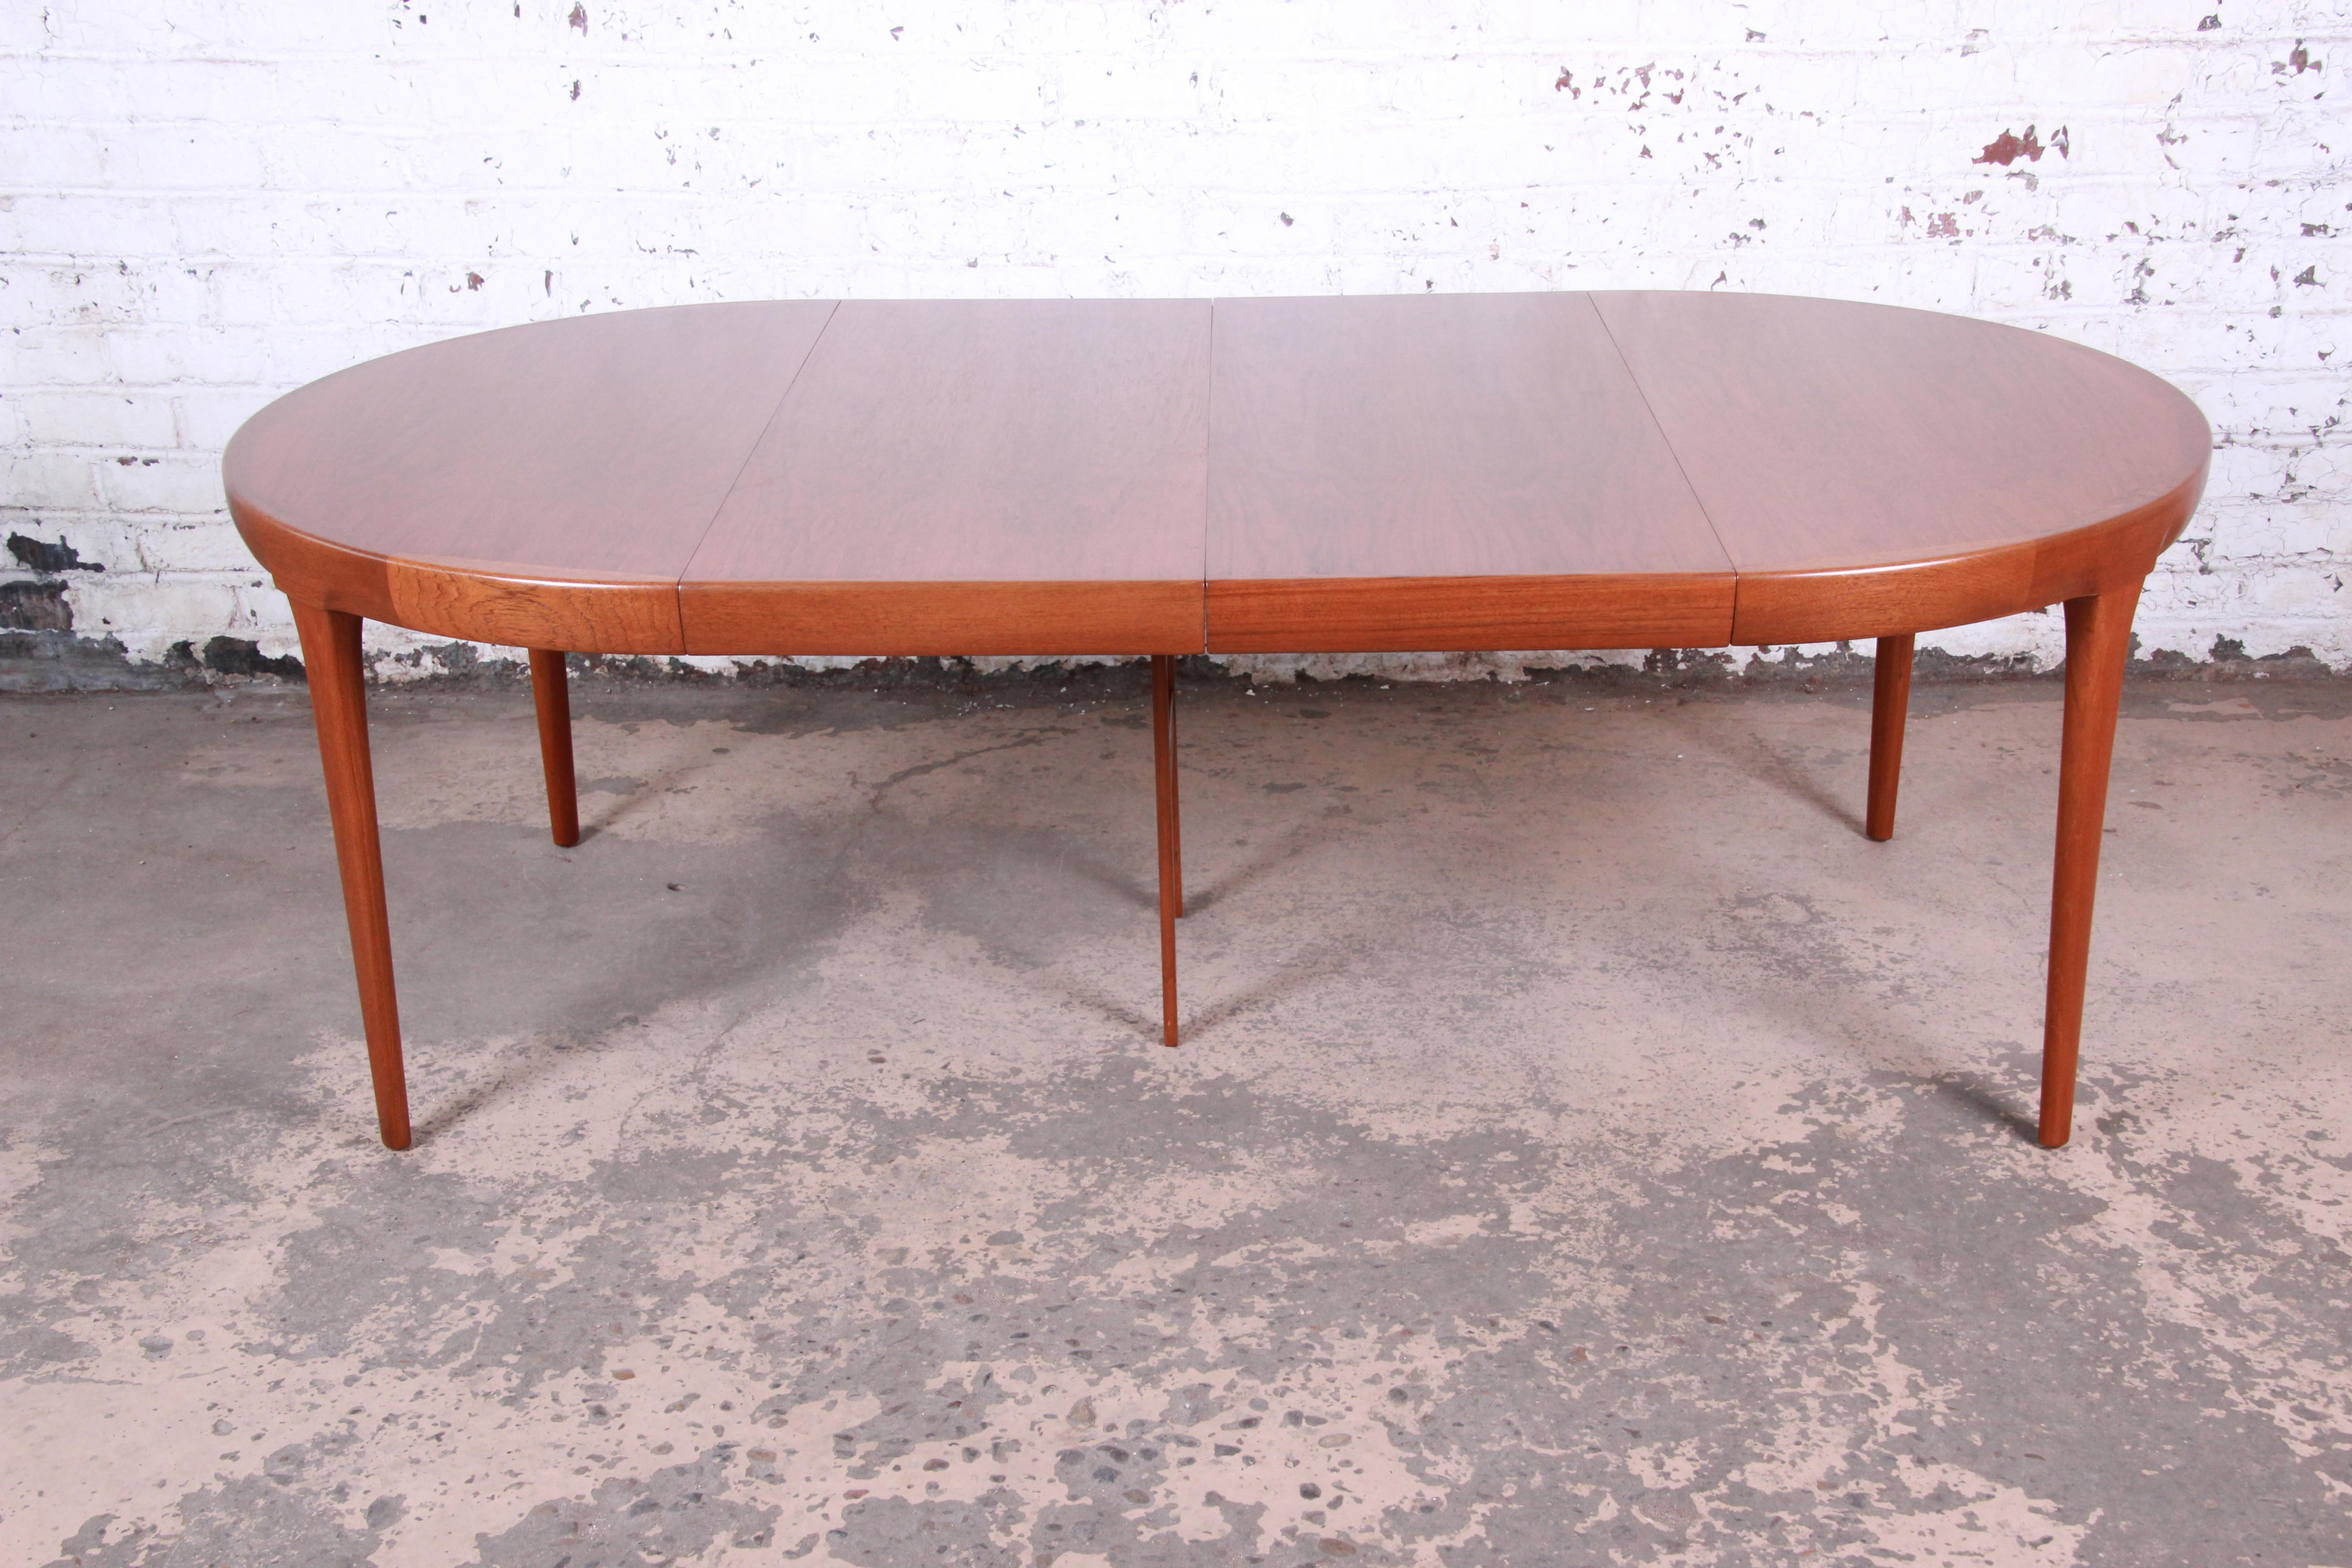 An exceptional midcentury Danish modern teak extension dining table designed by Ib Kofod-Larsen for Faarup Møbelfabrik. The table features gorgeous teak wood grain with solid sculpted teak legs and sleek Scandinavian design. Made in Denmark, circa